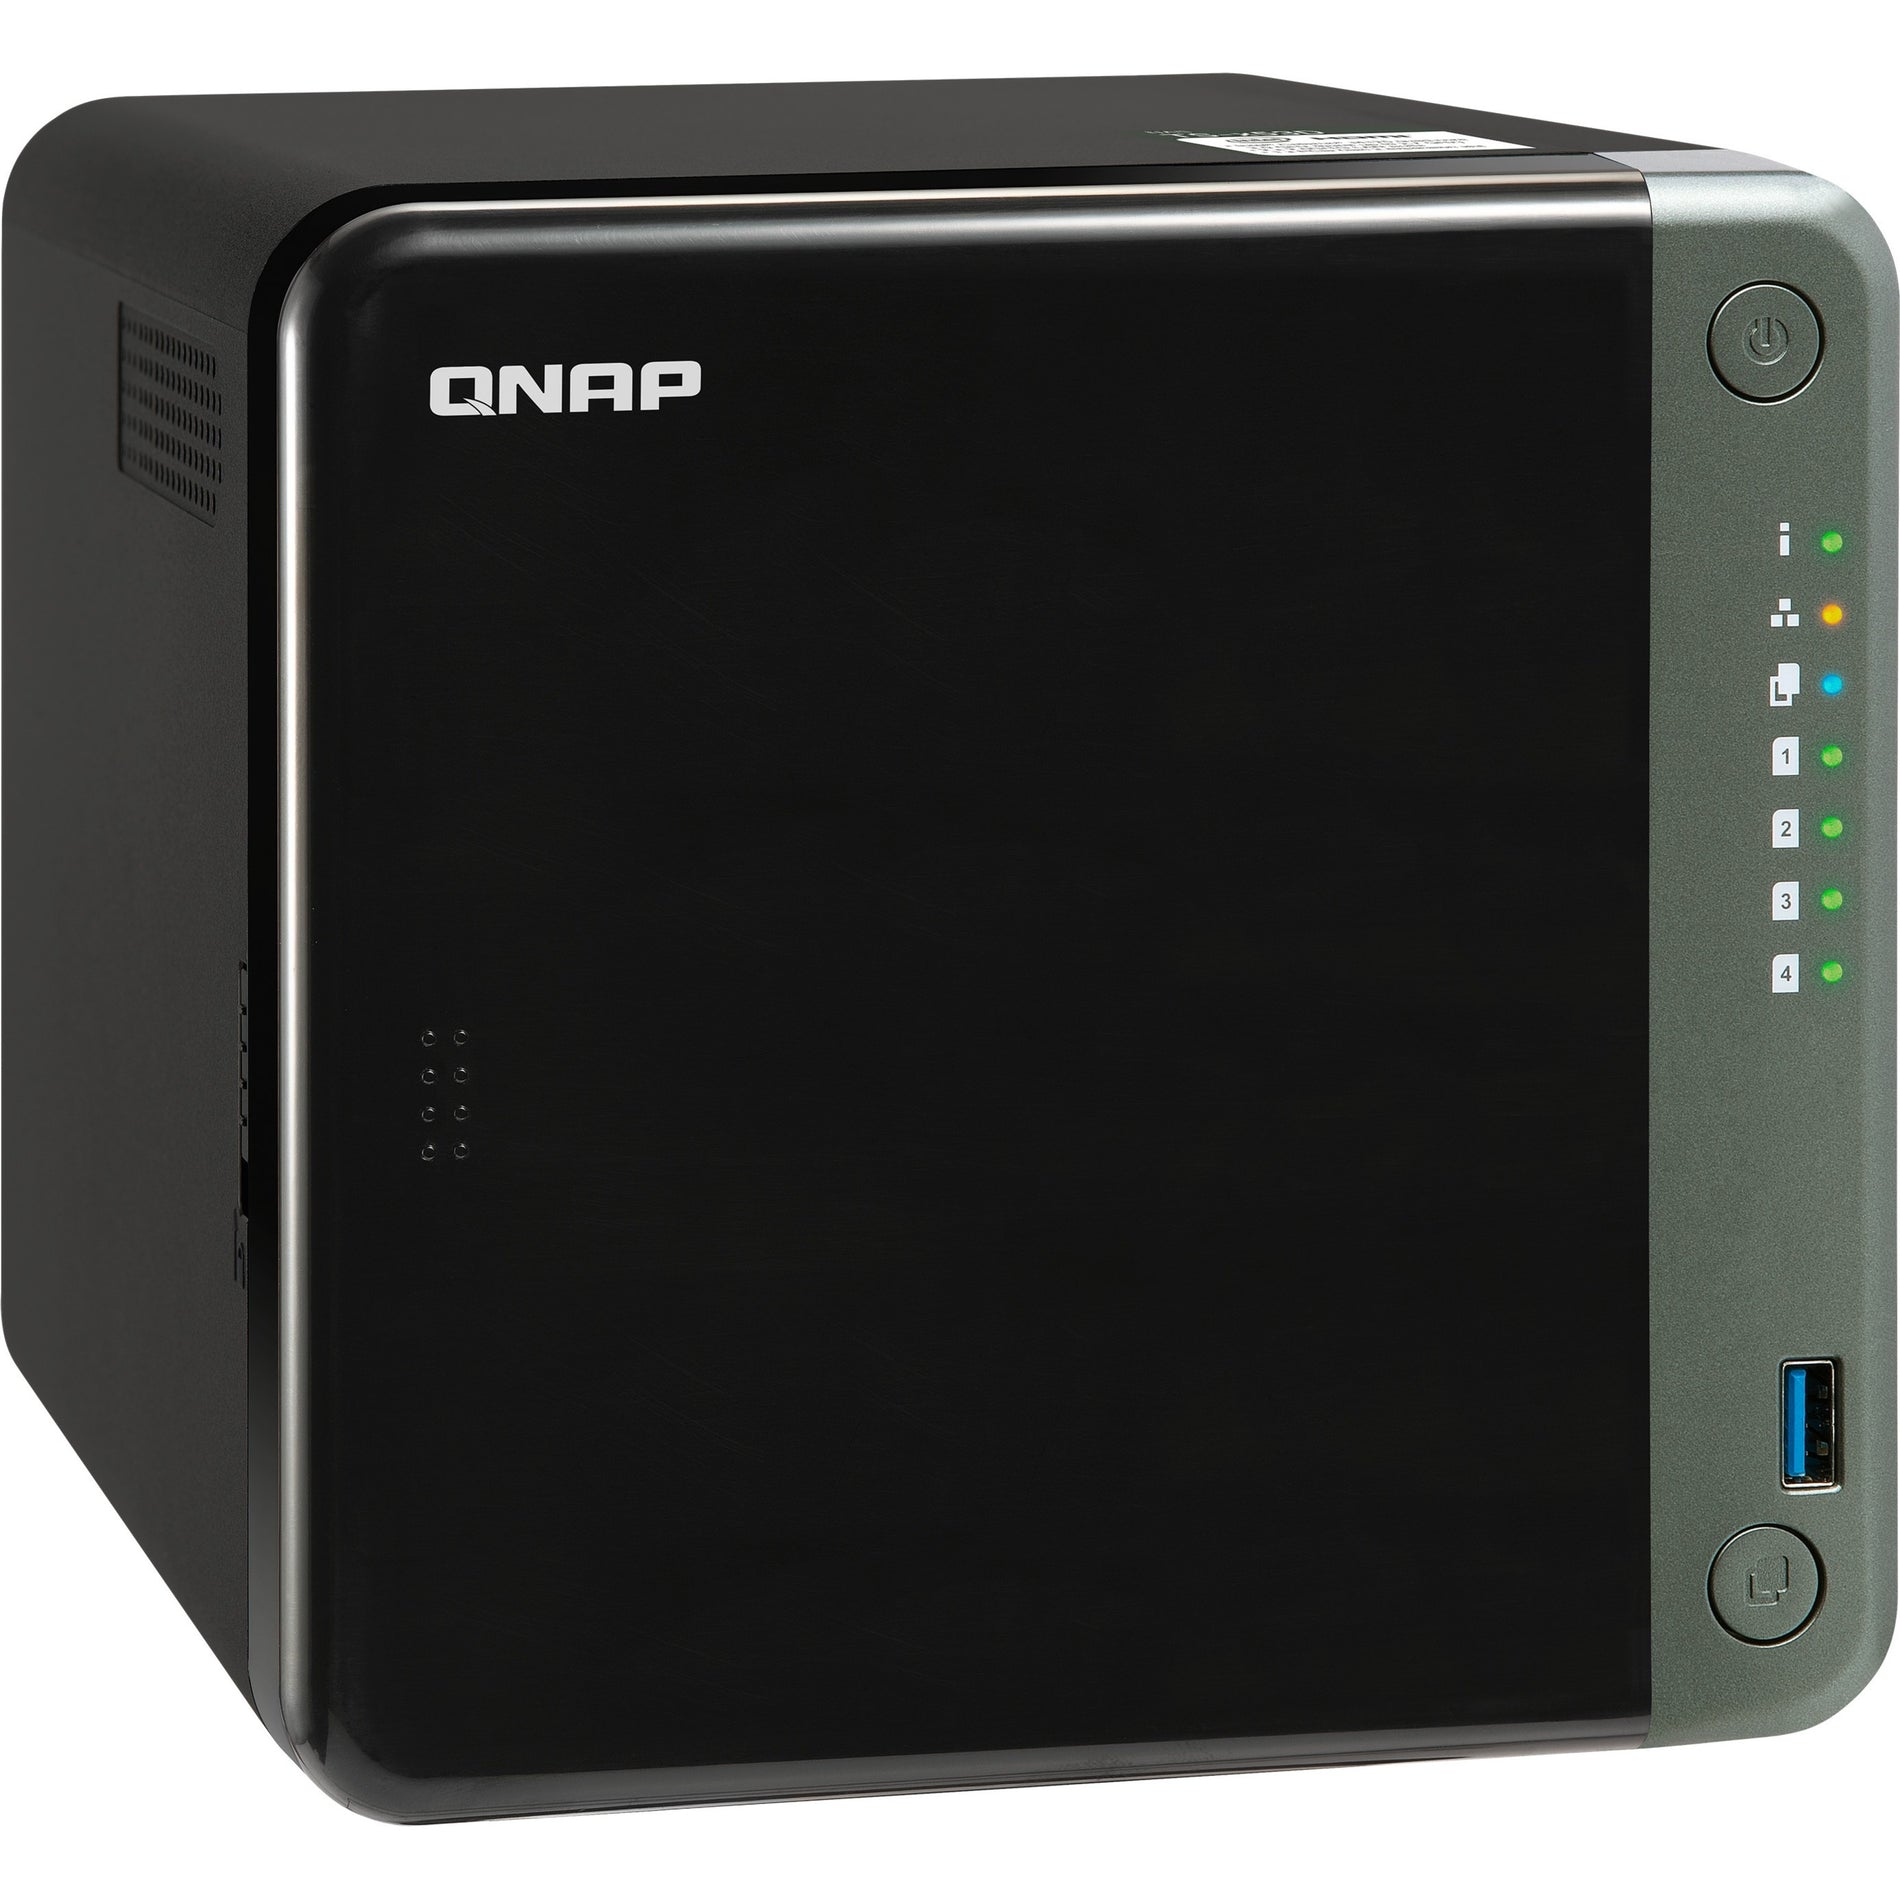 QNAP TS-453D-4G-US Professional Quad-core 2.0 GHz NAS with 2.5GbE Connectivity and PCIe Expansion, Intel Celeron J4125, 4GB RAM